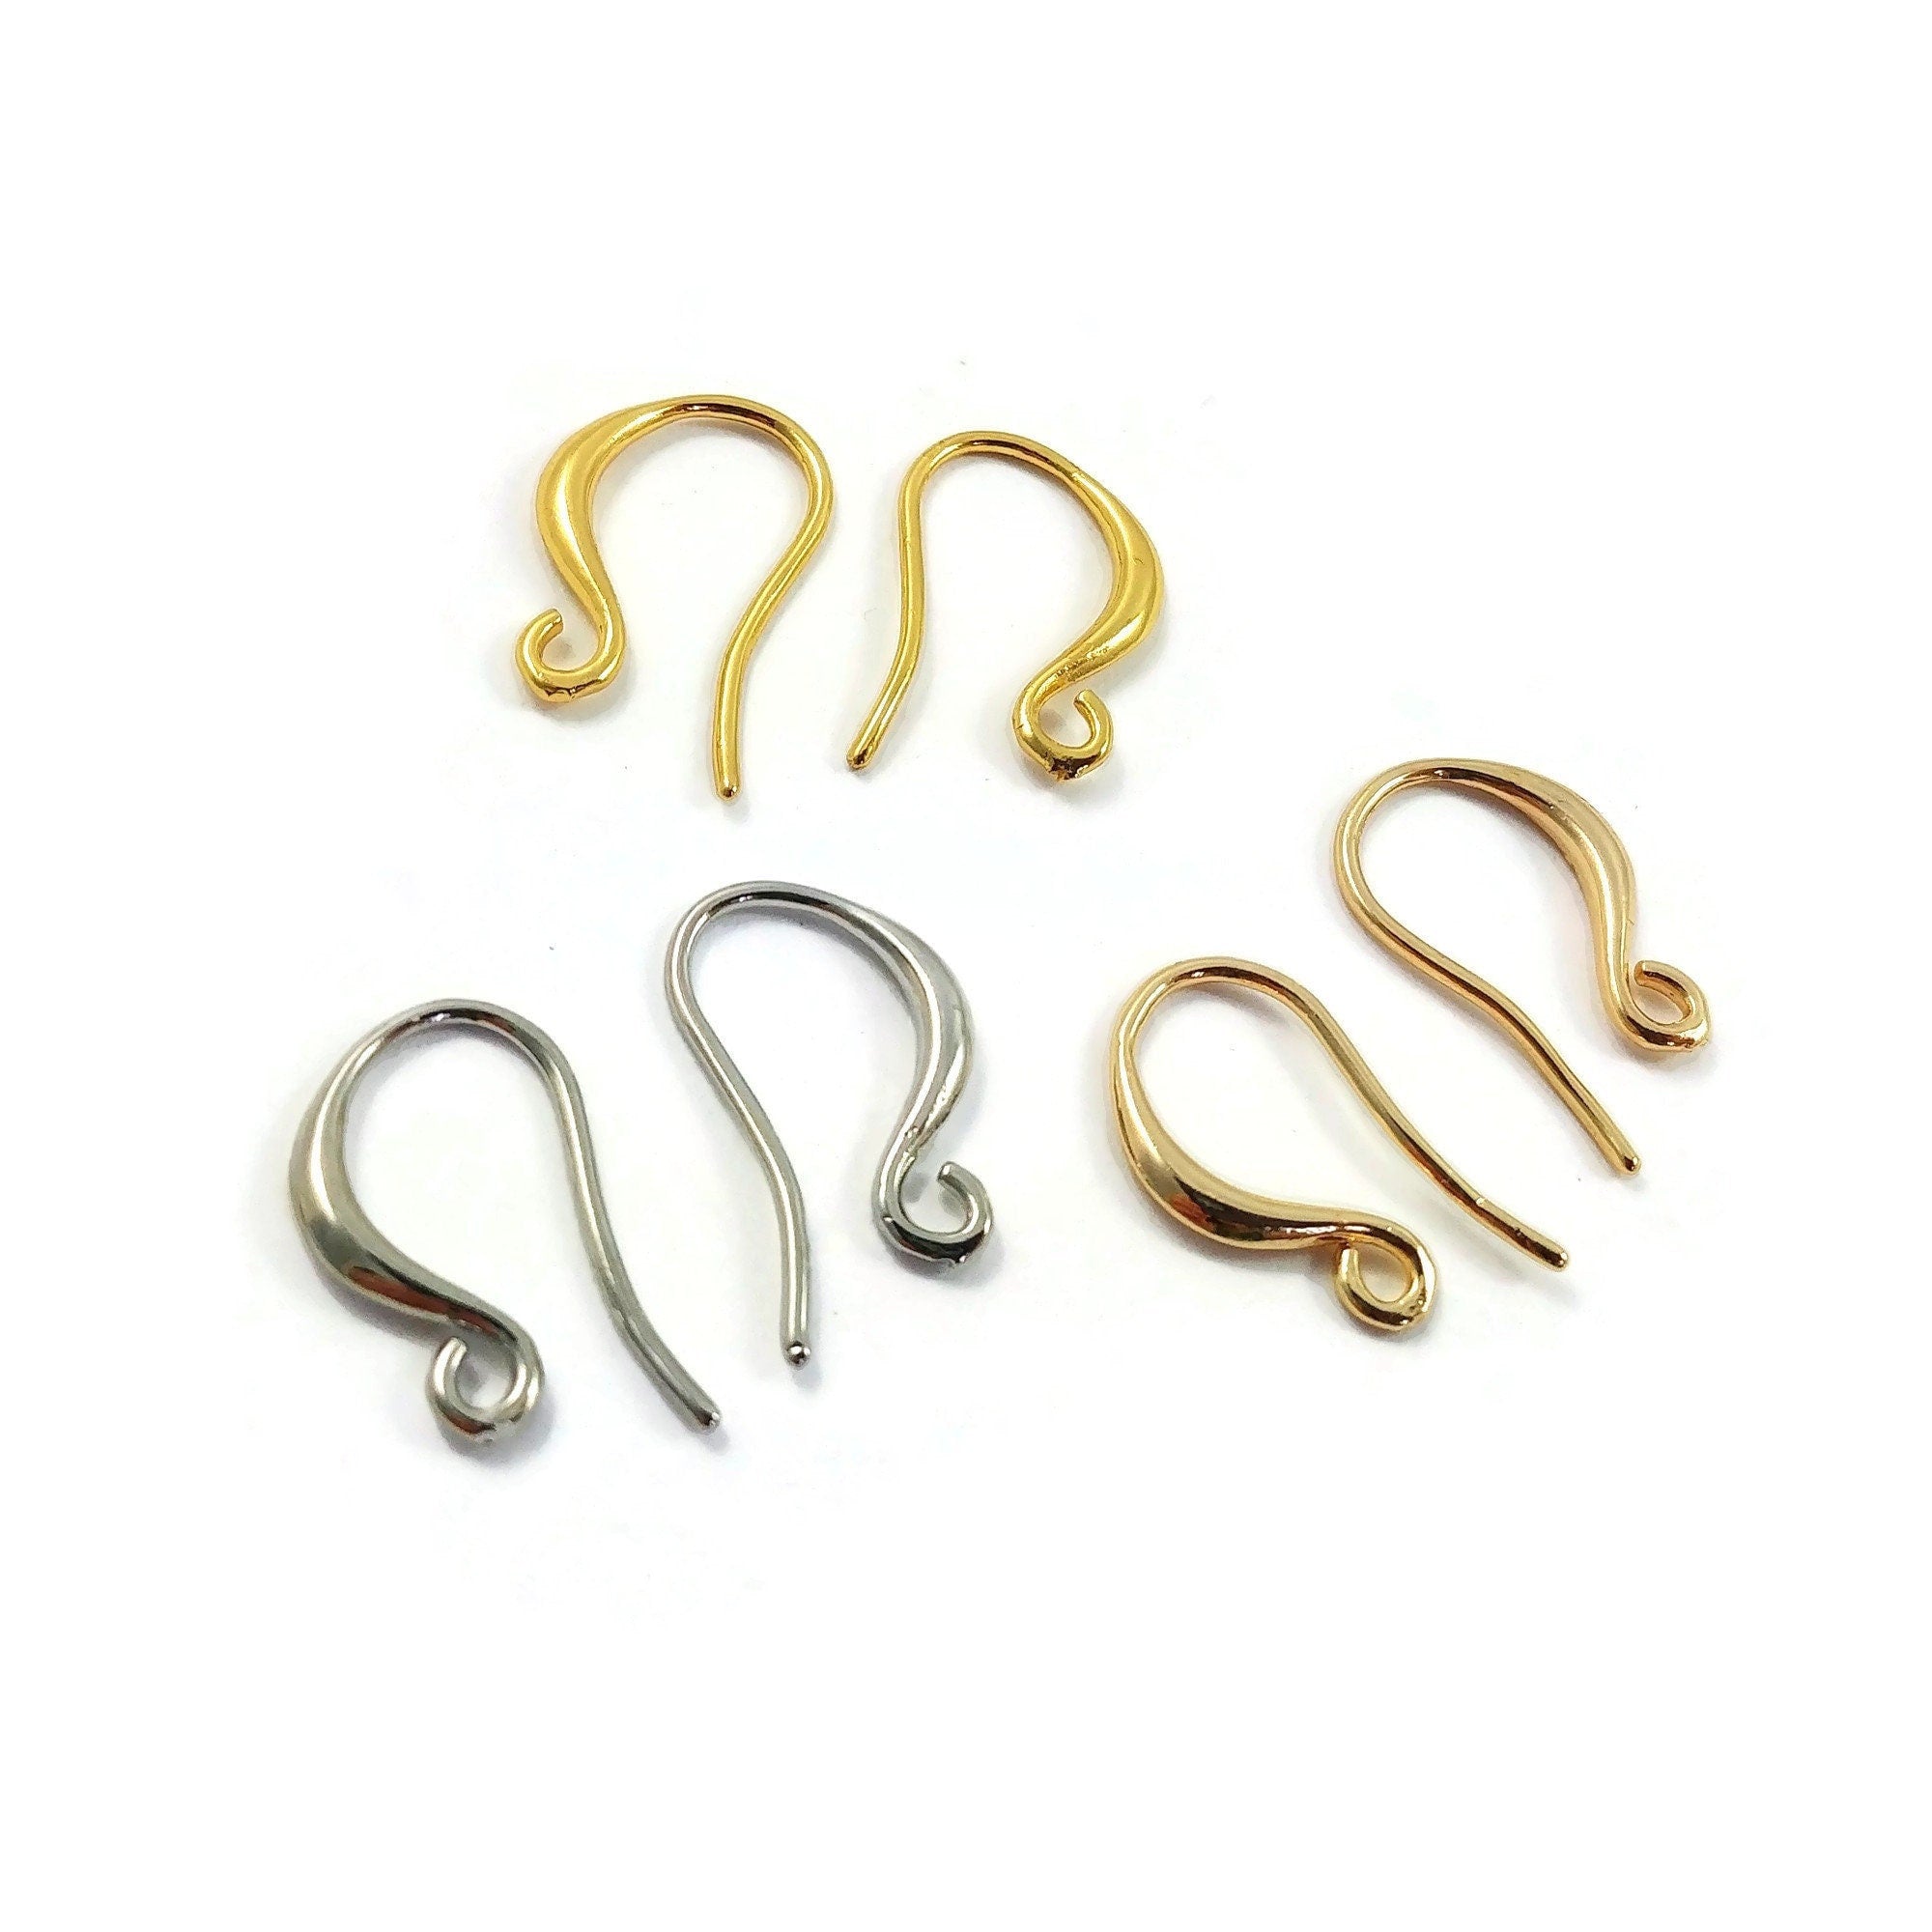 Earring Hooks for Jewelry Making - 120 PCS/60 Pairs Hypoallergenic 14K Gold Ear  Wires Fish Hook - Earrings - Fort Lauderdale, Florida, Facebook  Marketplace